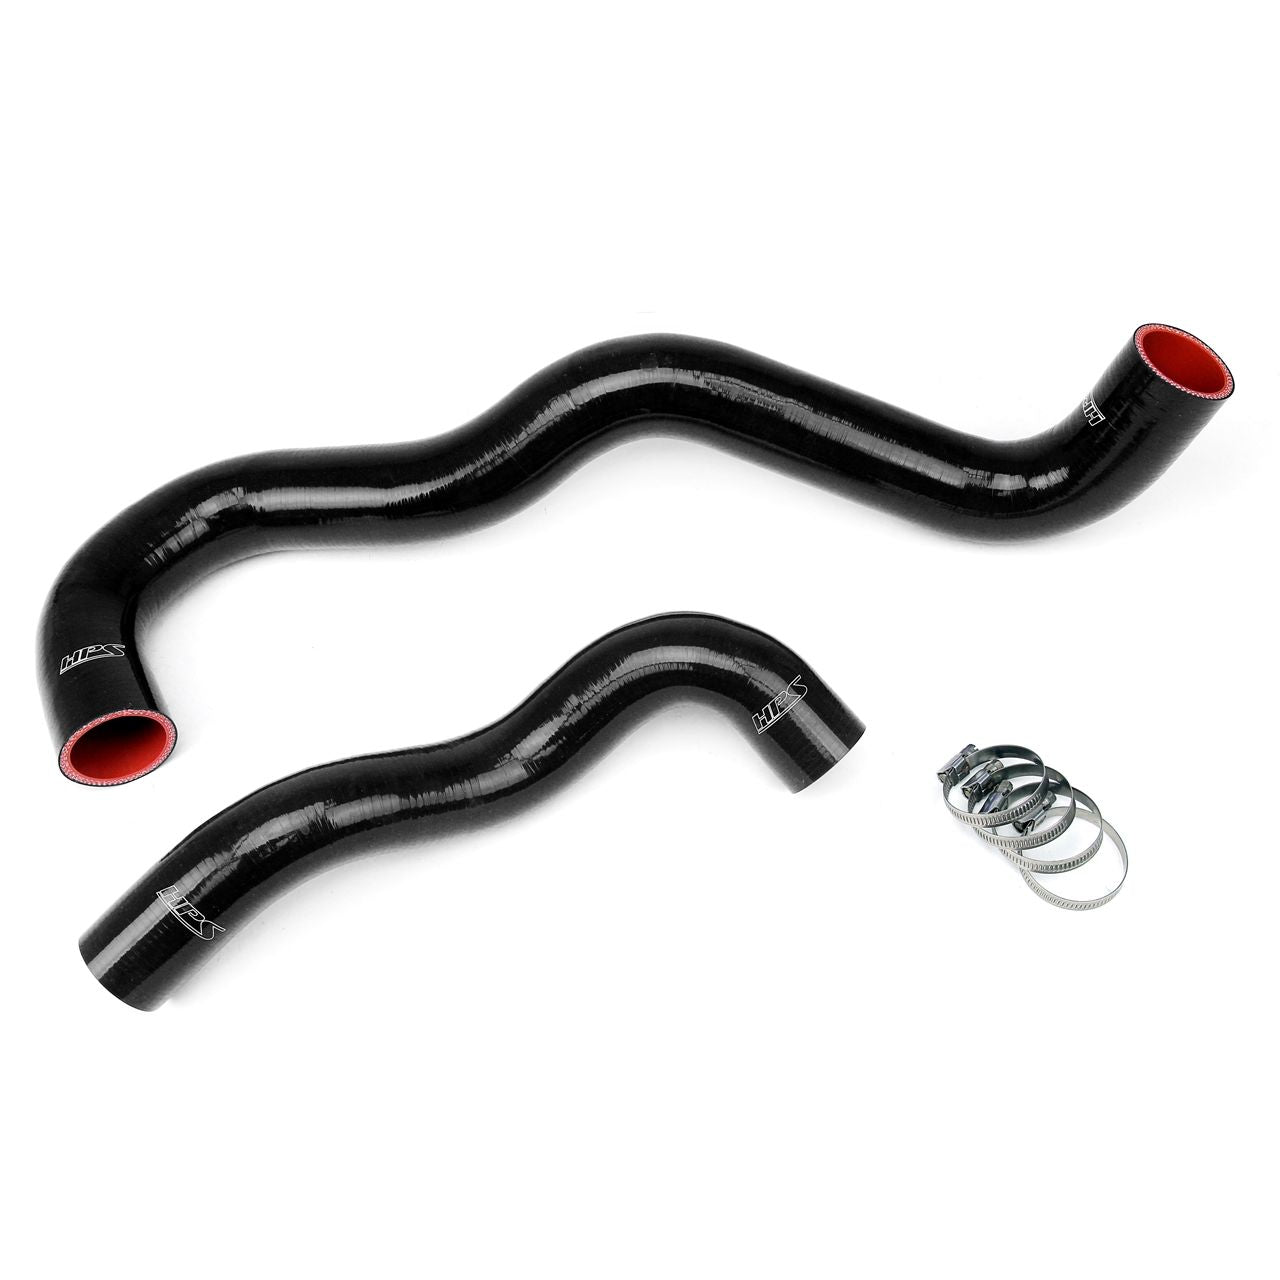 HPS Black Reinforced Silicone Radiator Hose Kit Coolant for Ford 03-07 Excursion 6.0L Diesel w/ Twin Beam Suspension